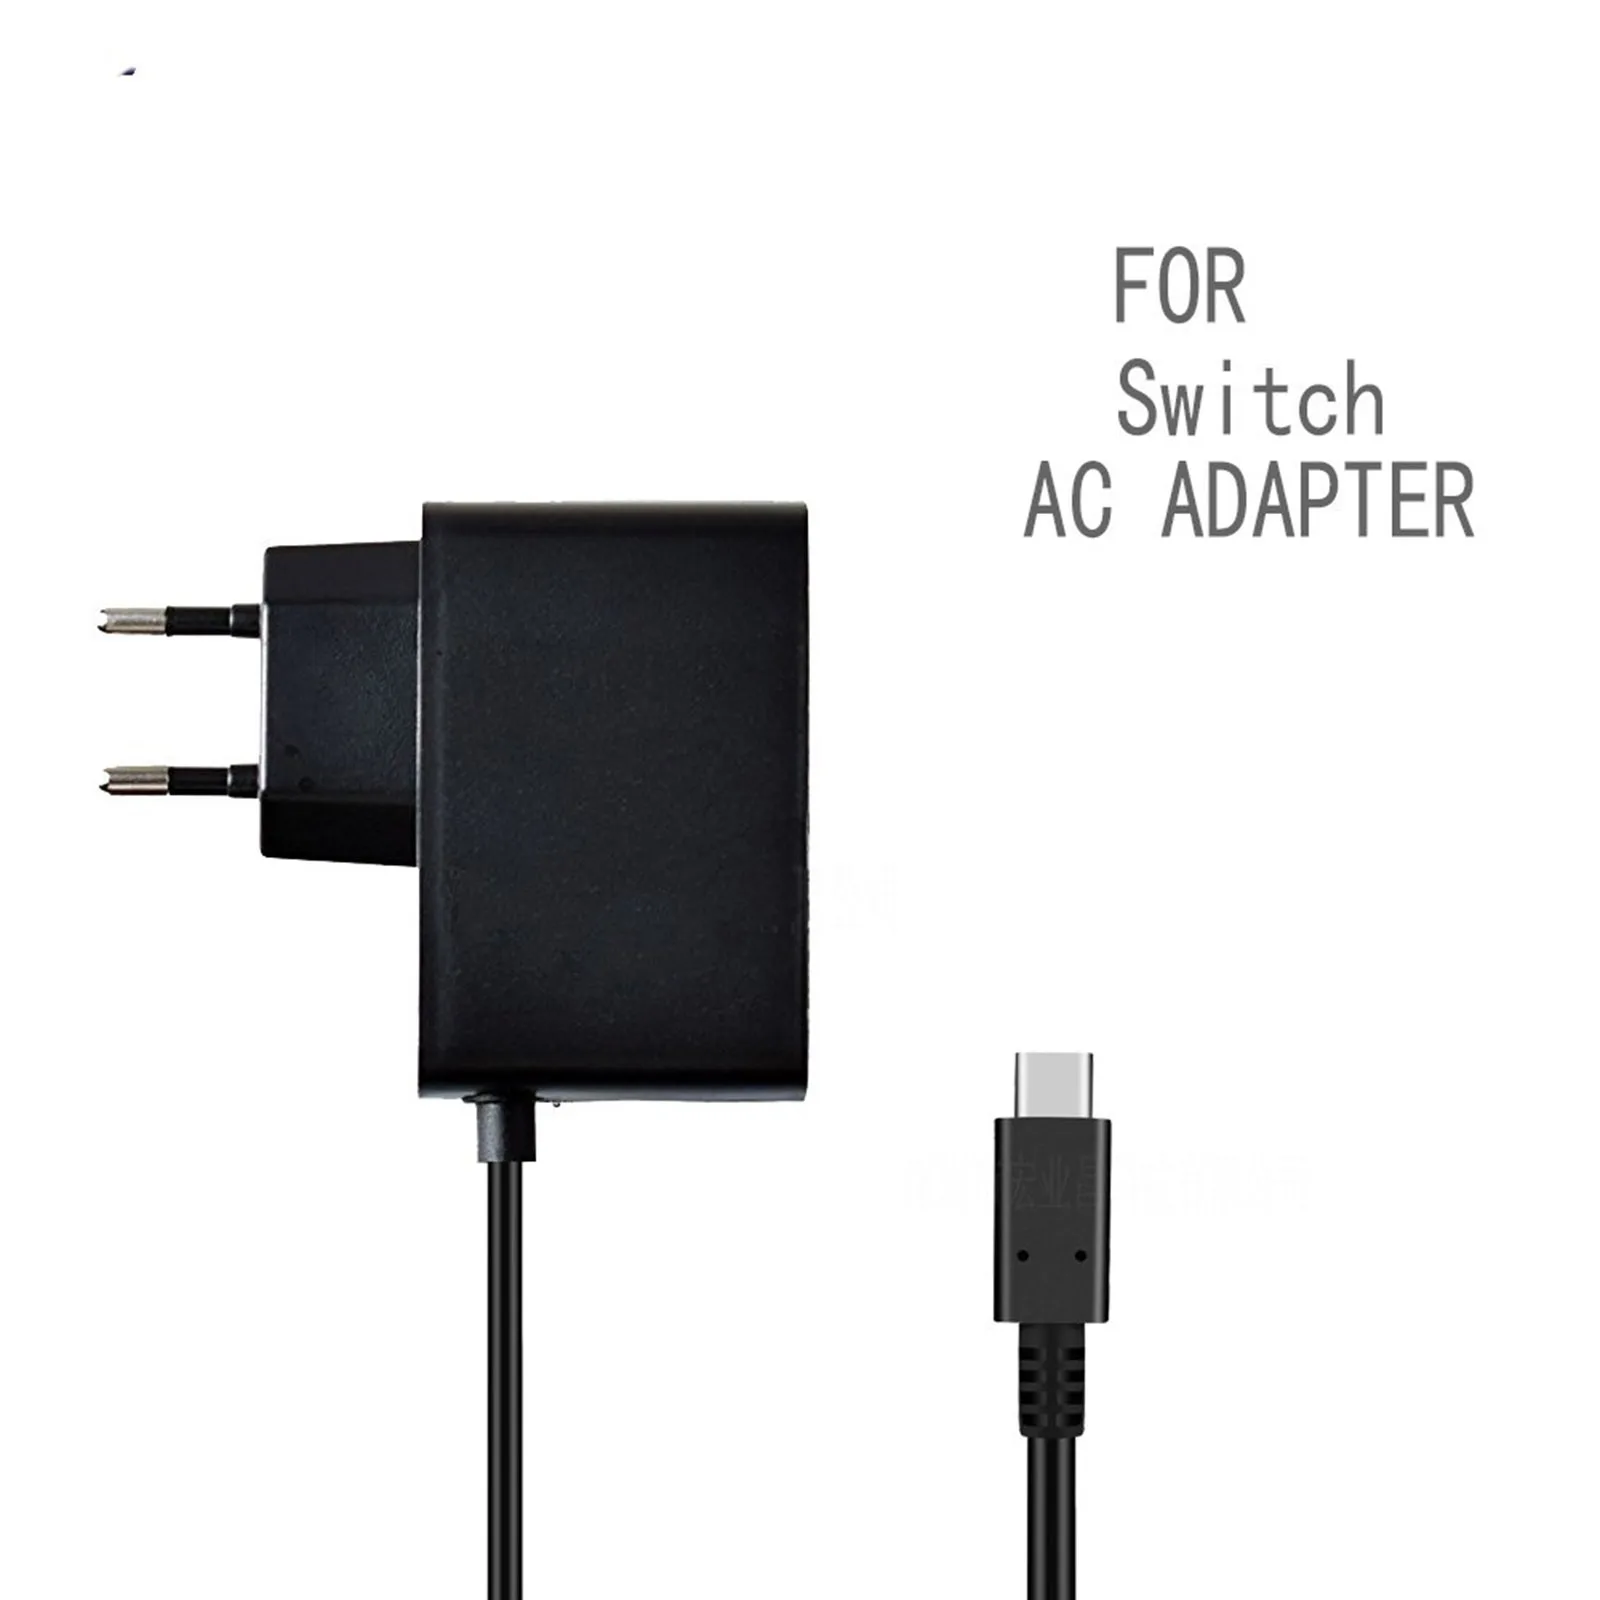   Adapter Charger Travel Charger for Nintend Switch EU Plug Charging USB Type C Power Supply Power Adapter